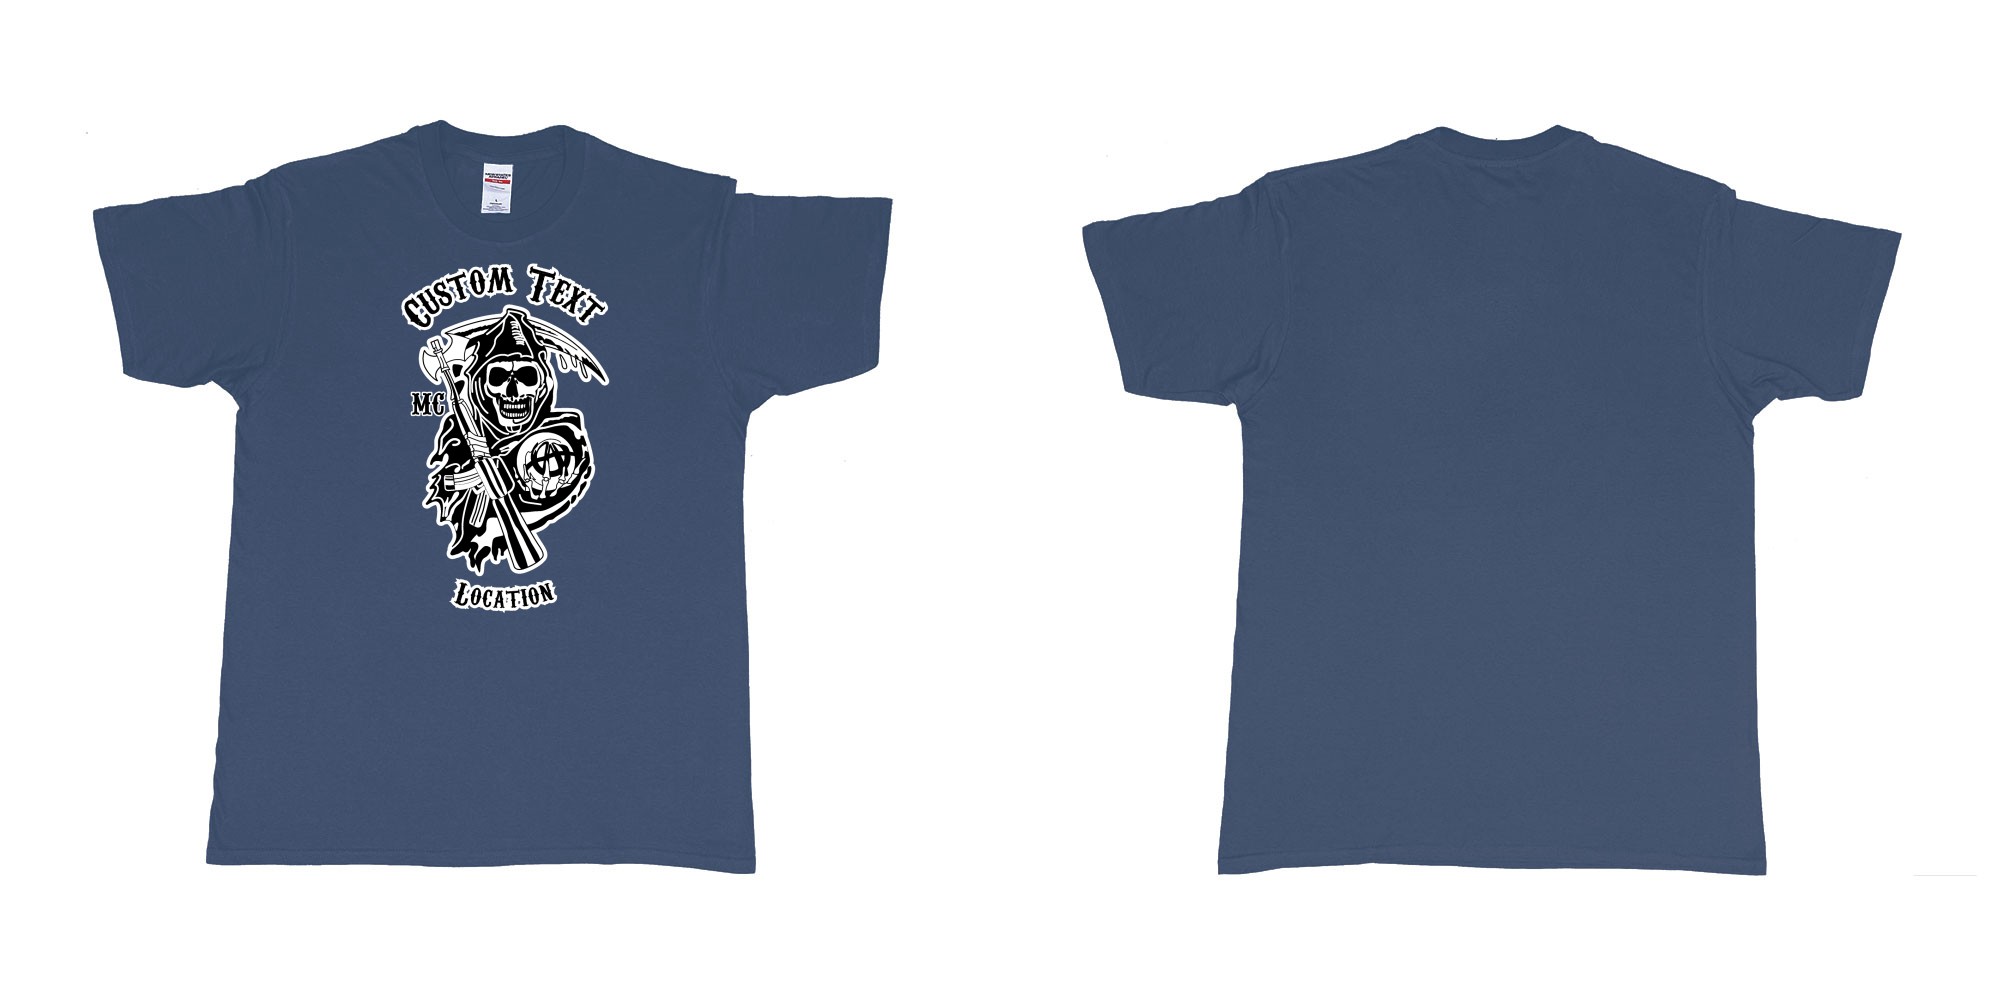 Custom tshirt design son of anarchy logo custom text in fabric color navy choice your own text made in Bali by The Pirate Way